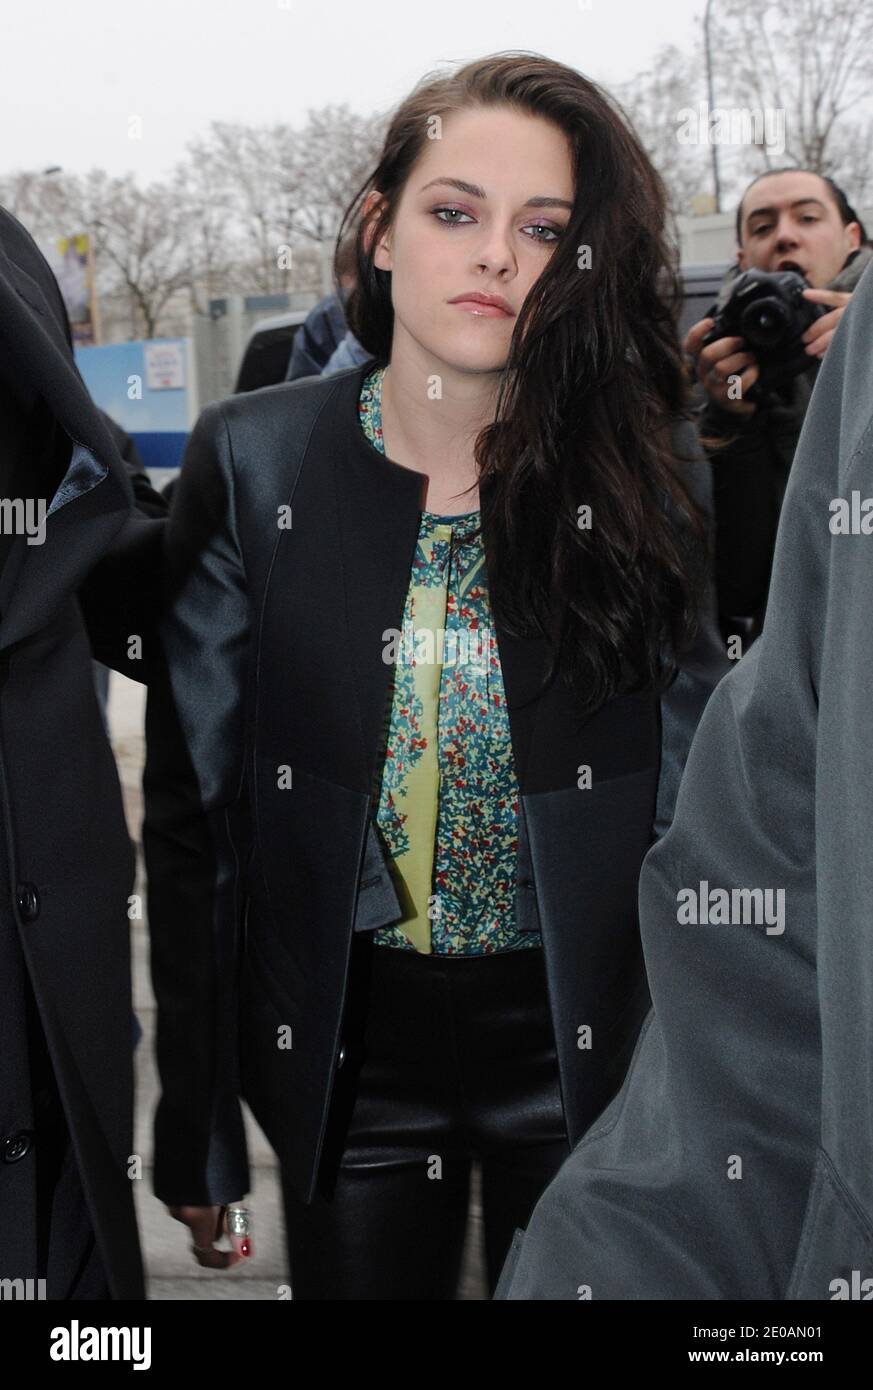 Kristen Stewart arriving for the Balenciaga Fall-Winter 2012-2013 Ready-To-Wear collection show held at Quai Javel in Paris, France on March 1, 2012, as part of the Paris Fashion Week. Photo by Giancarlo Gorassini/ABACAPRESS.COM Stock Photo